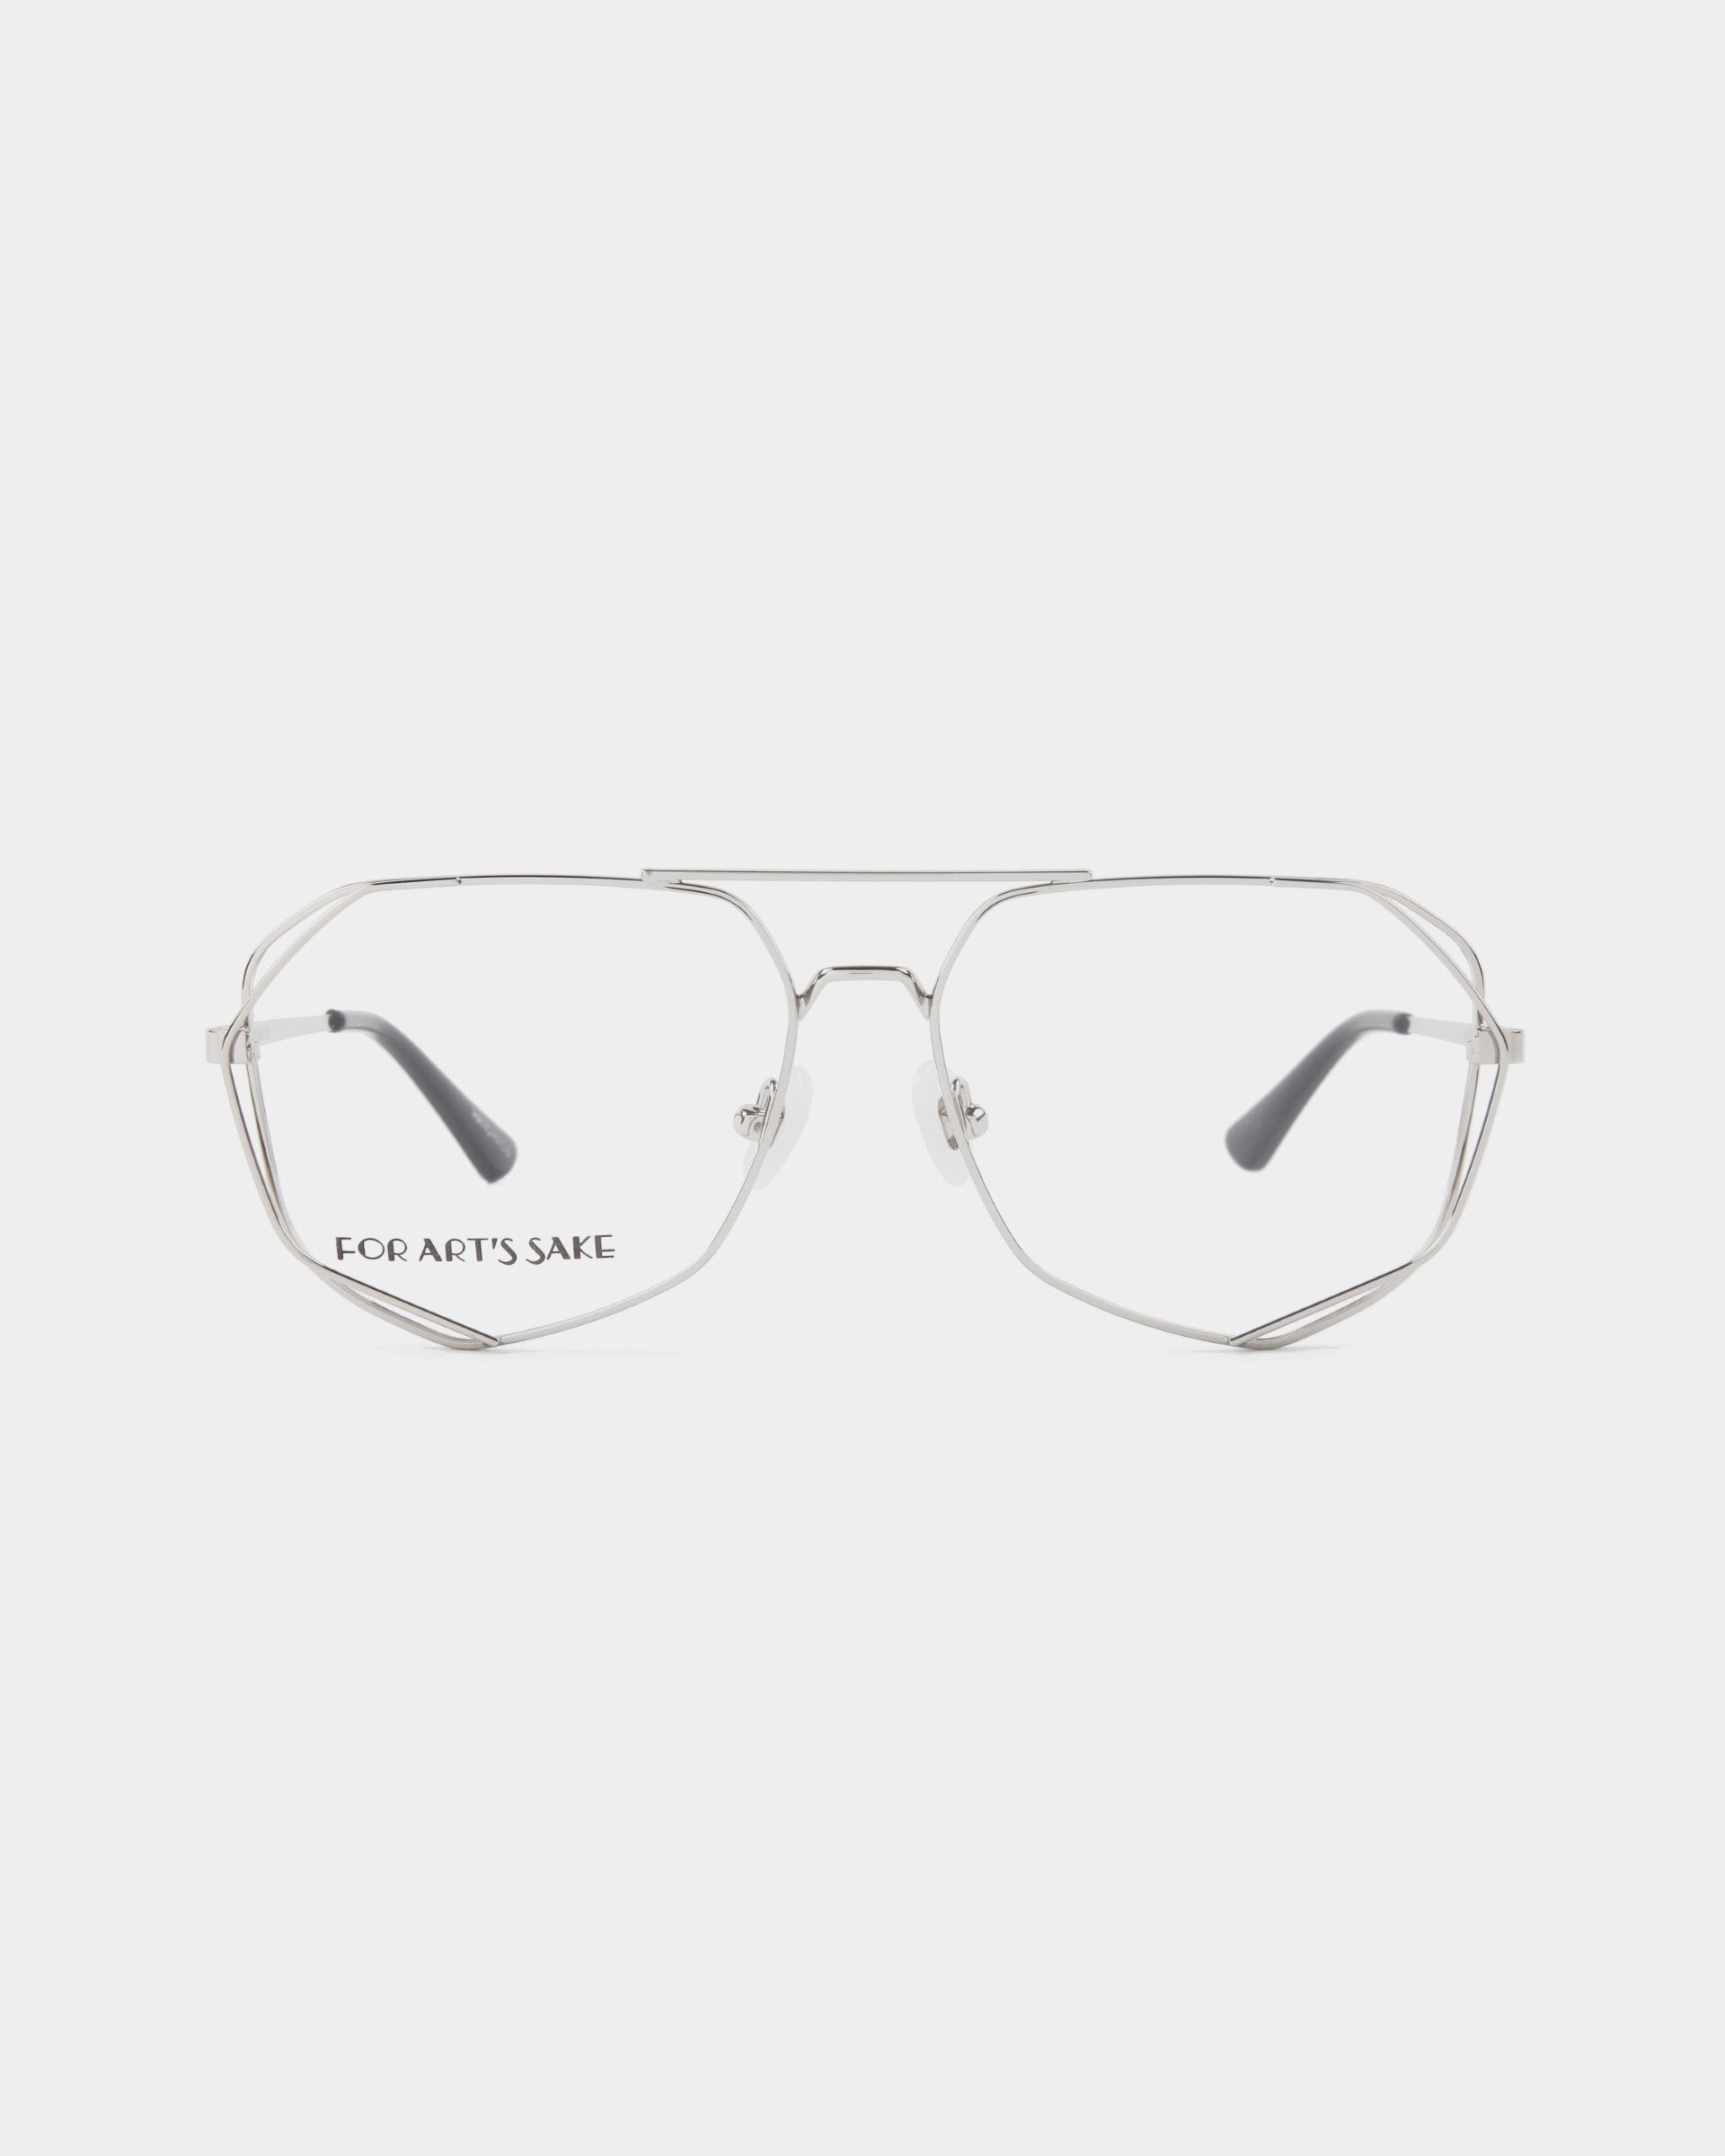 A pair of silver metal eyeglasses with thin, geometric stainless steel frames and clear lenses. The words "FOR ART'S SAKE" are printed on the left lens. The glasses have adjustable nose pads and black ear tips. With a plain white background, these stylish specs offer a Blue Light Filter option for added protection. These are the Genius eyeglasses by For Art's Sake®.